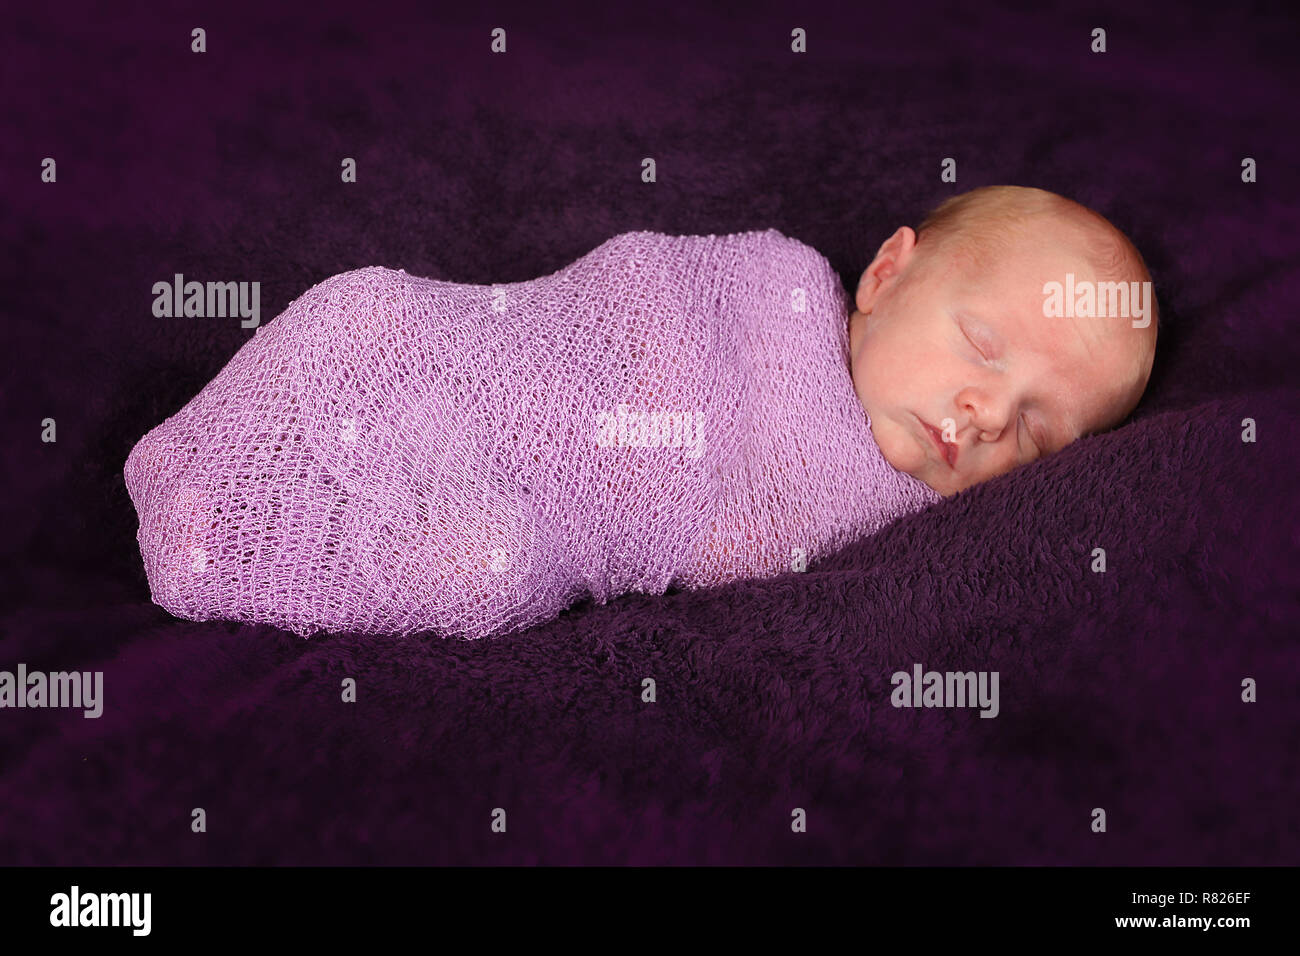 New Born Baby Boy, Banque D'Images